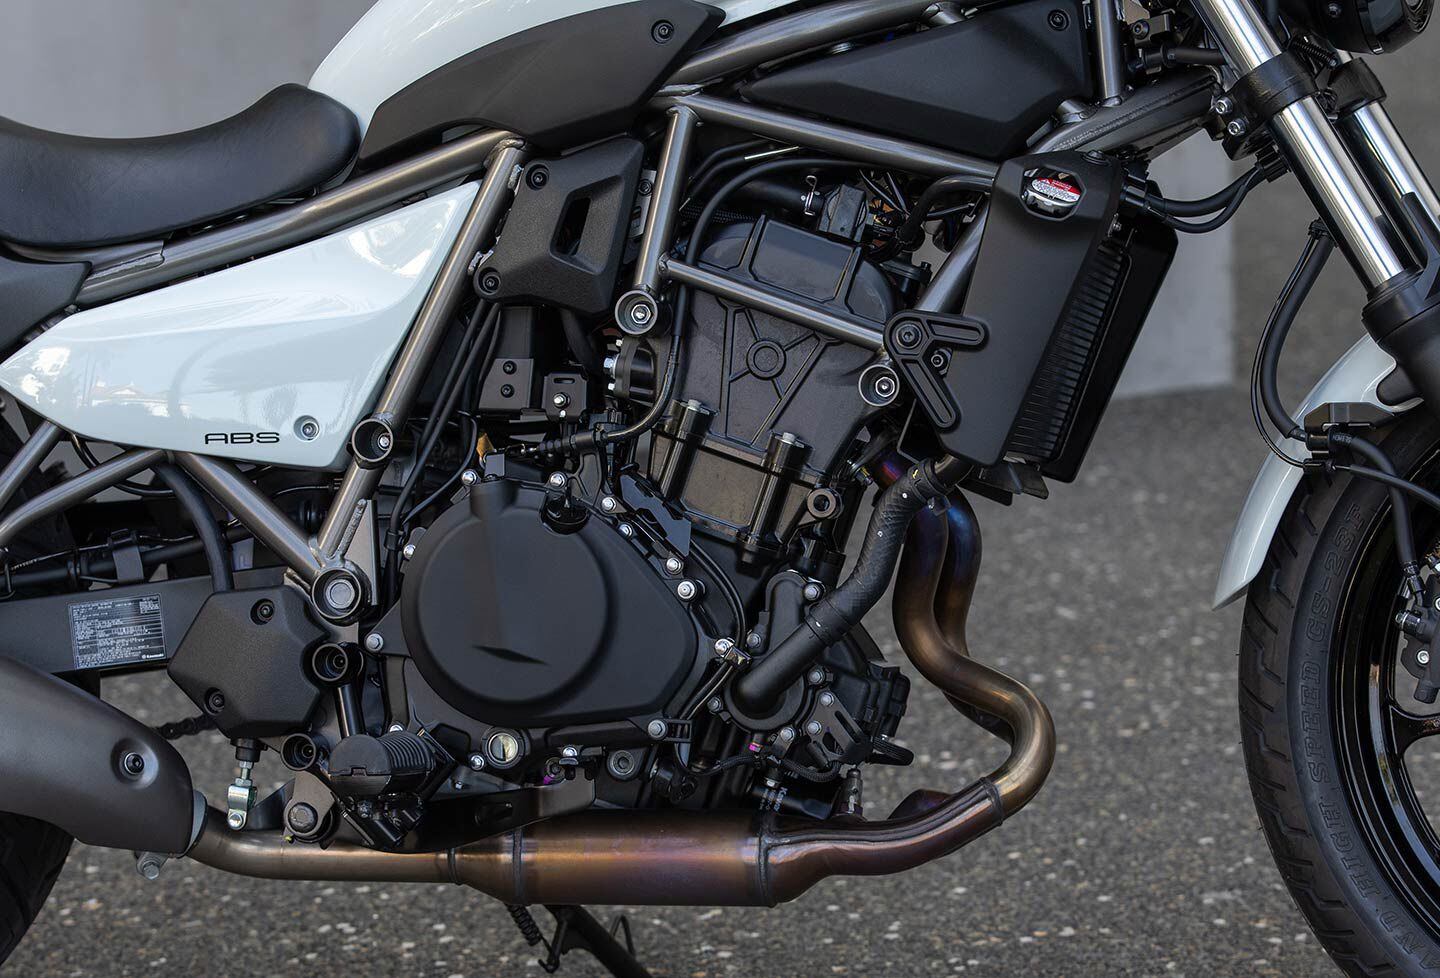 The Eliminator’s 451cc parallel twin is derived from the Ninja 400 and Z400. To achieve a larger displacement over its cousins, the Eliminator received a larger stroke of 58.6mm.